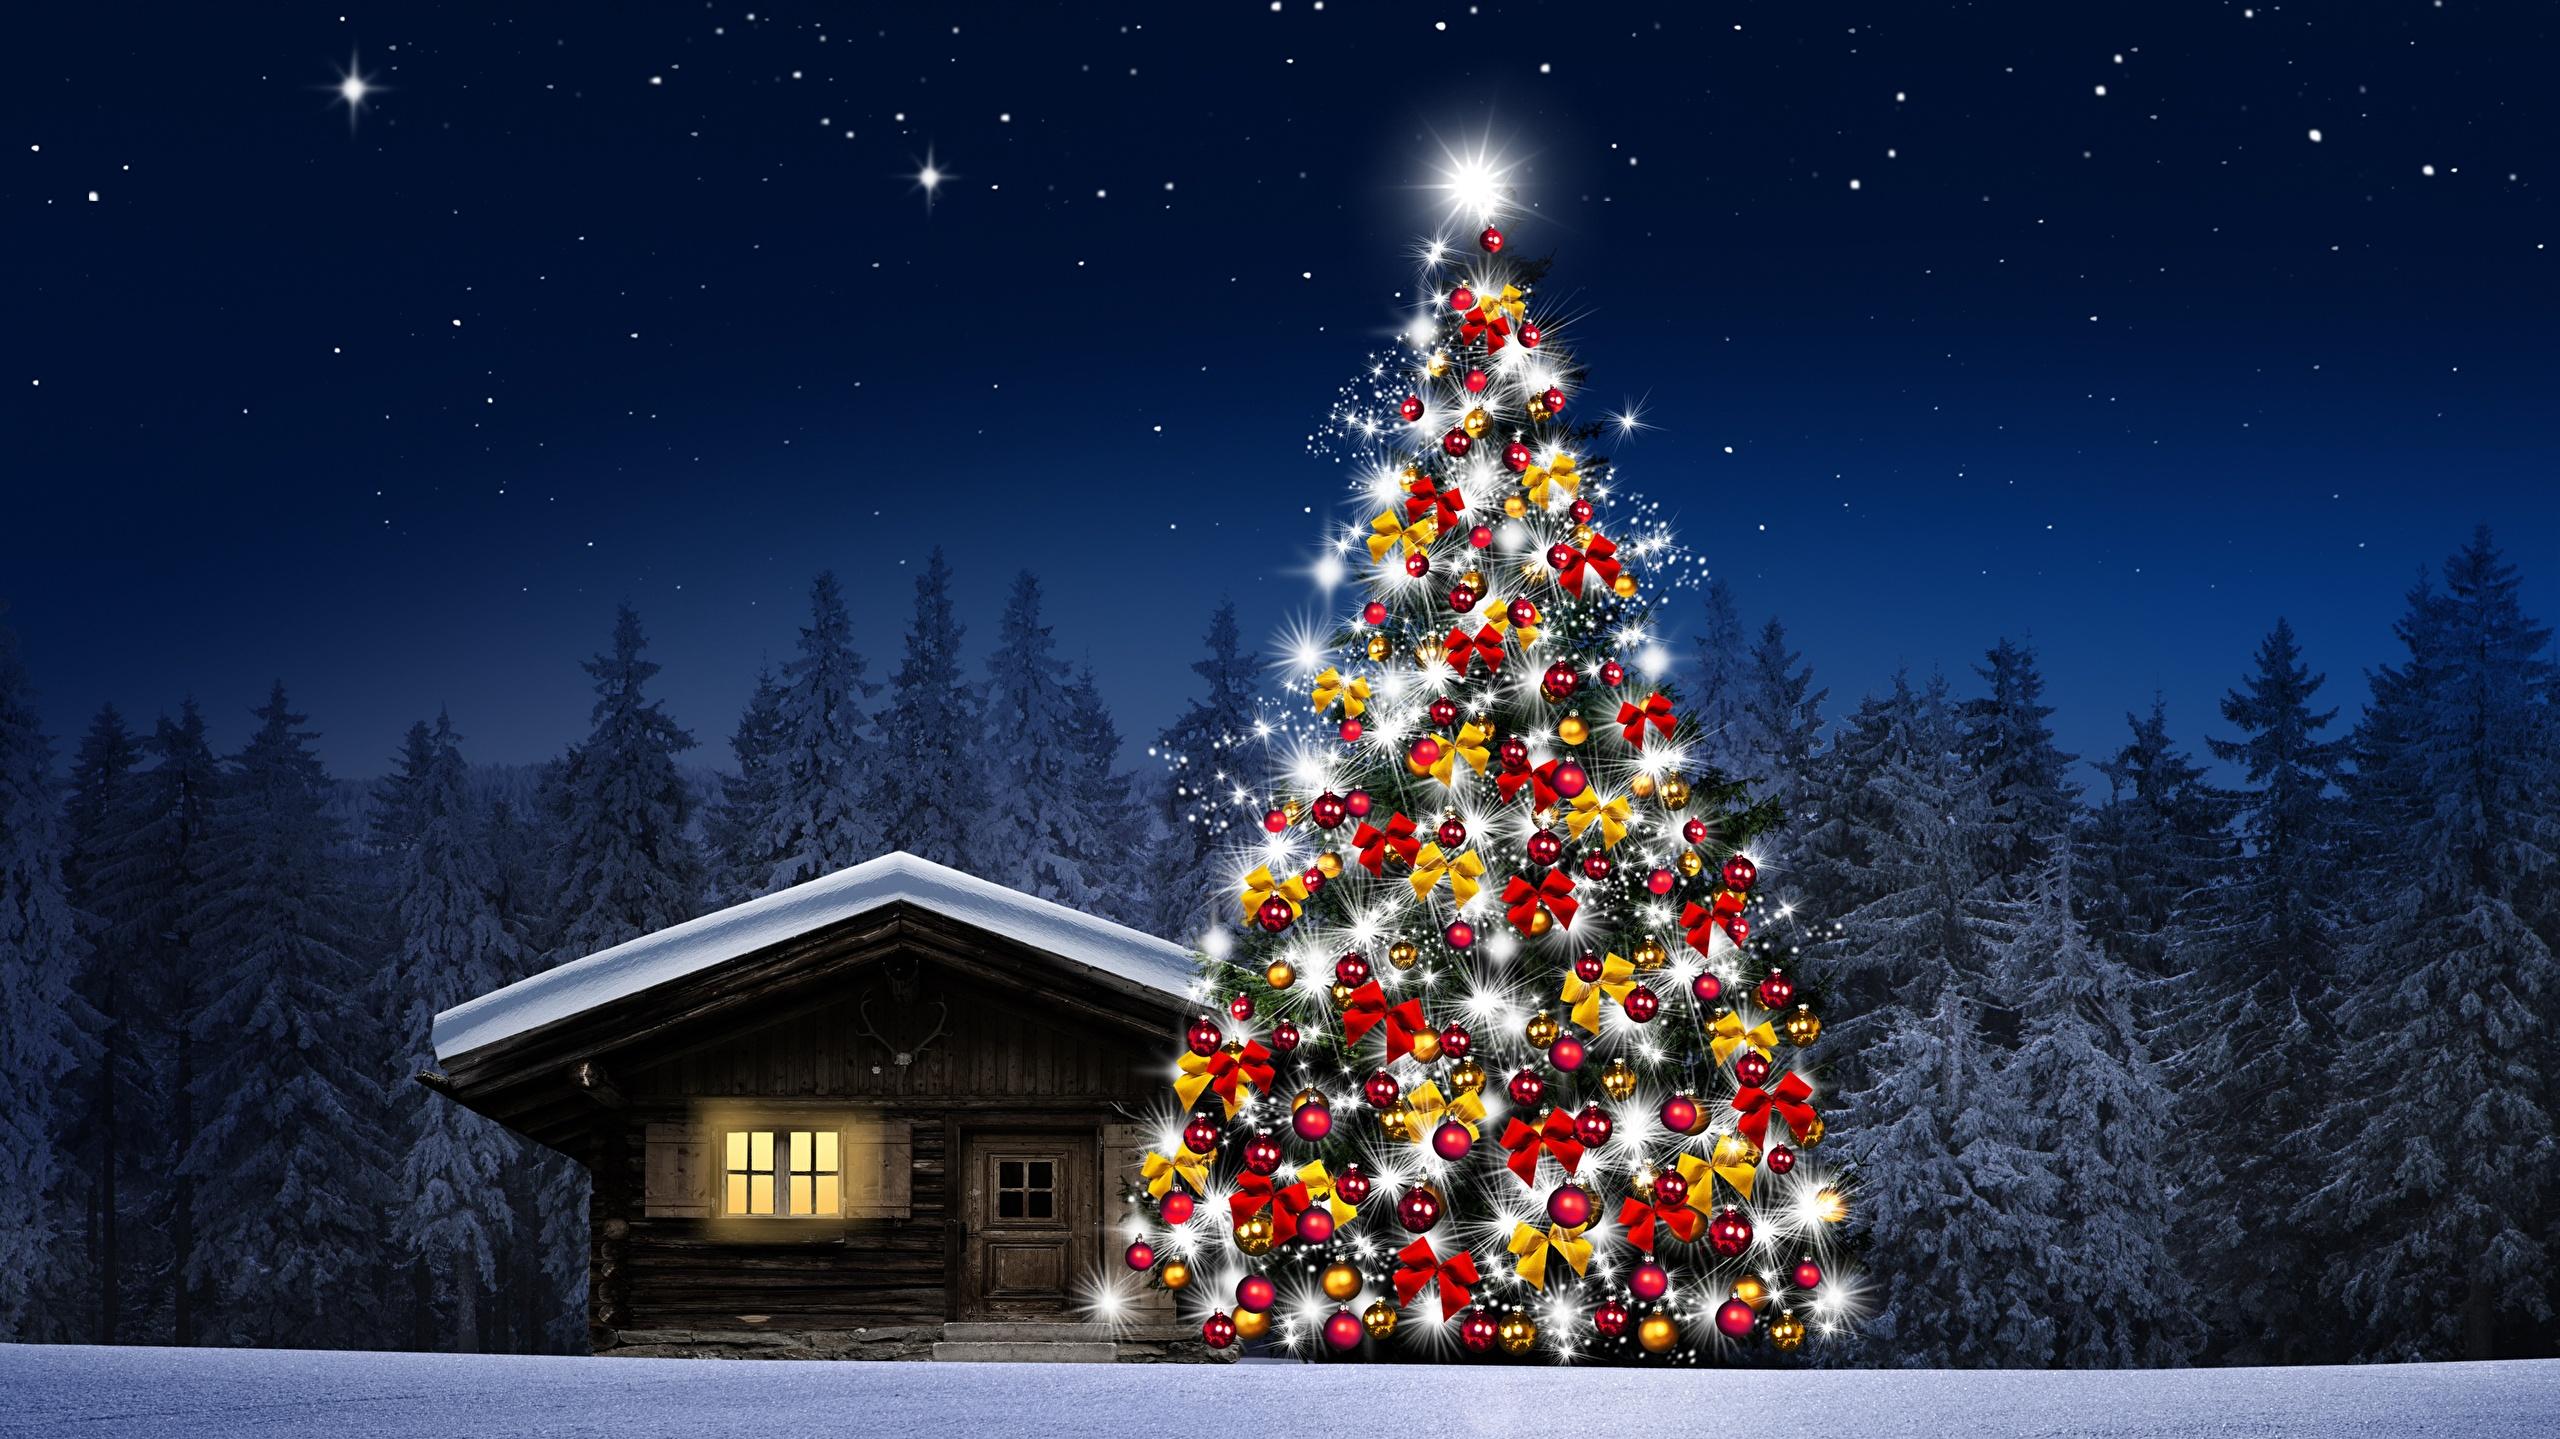 Image Nature Christmas Tree Snow Forests Night Time